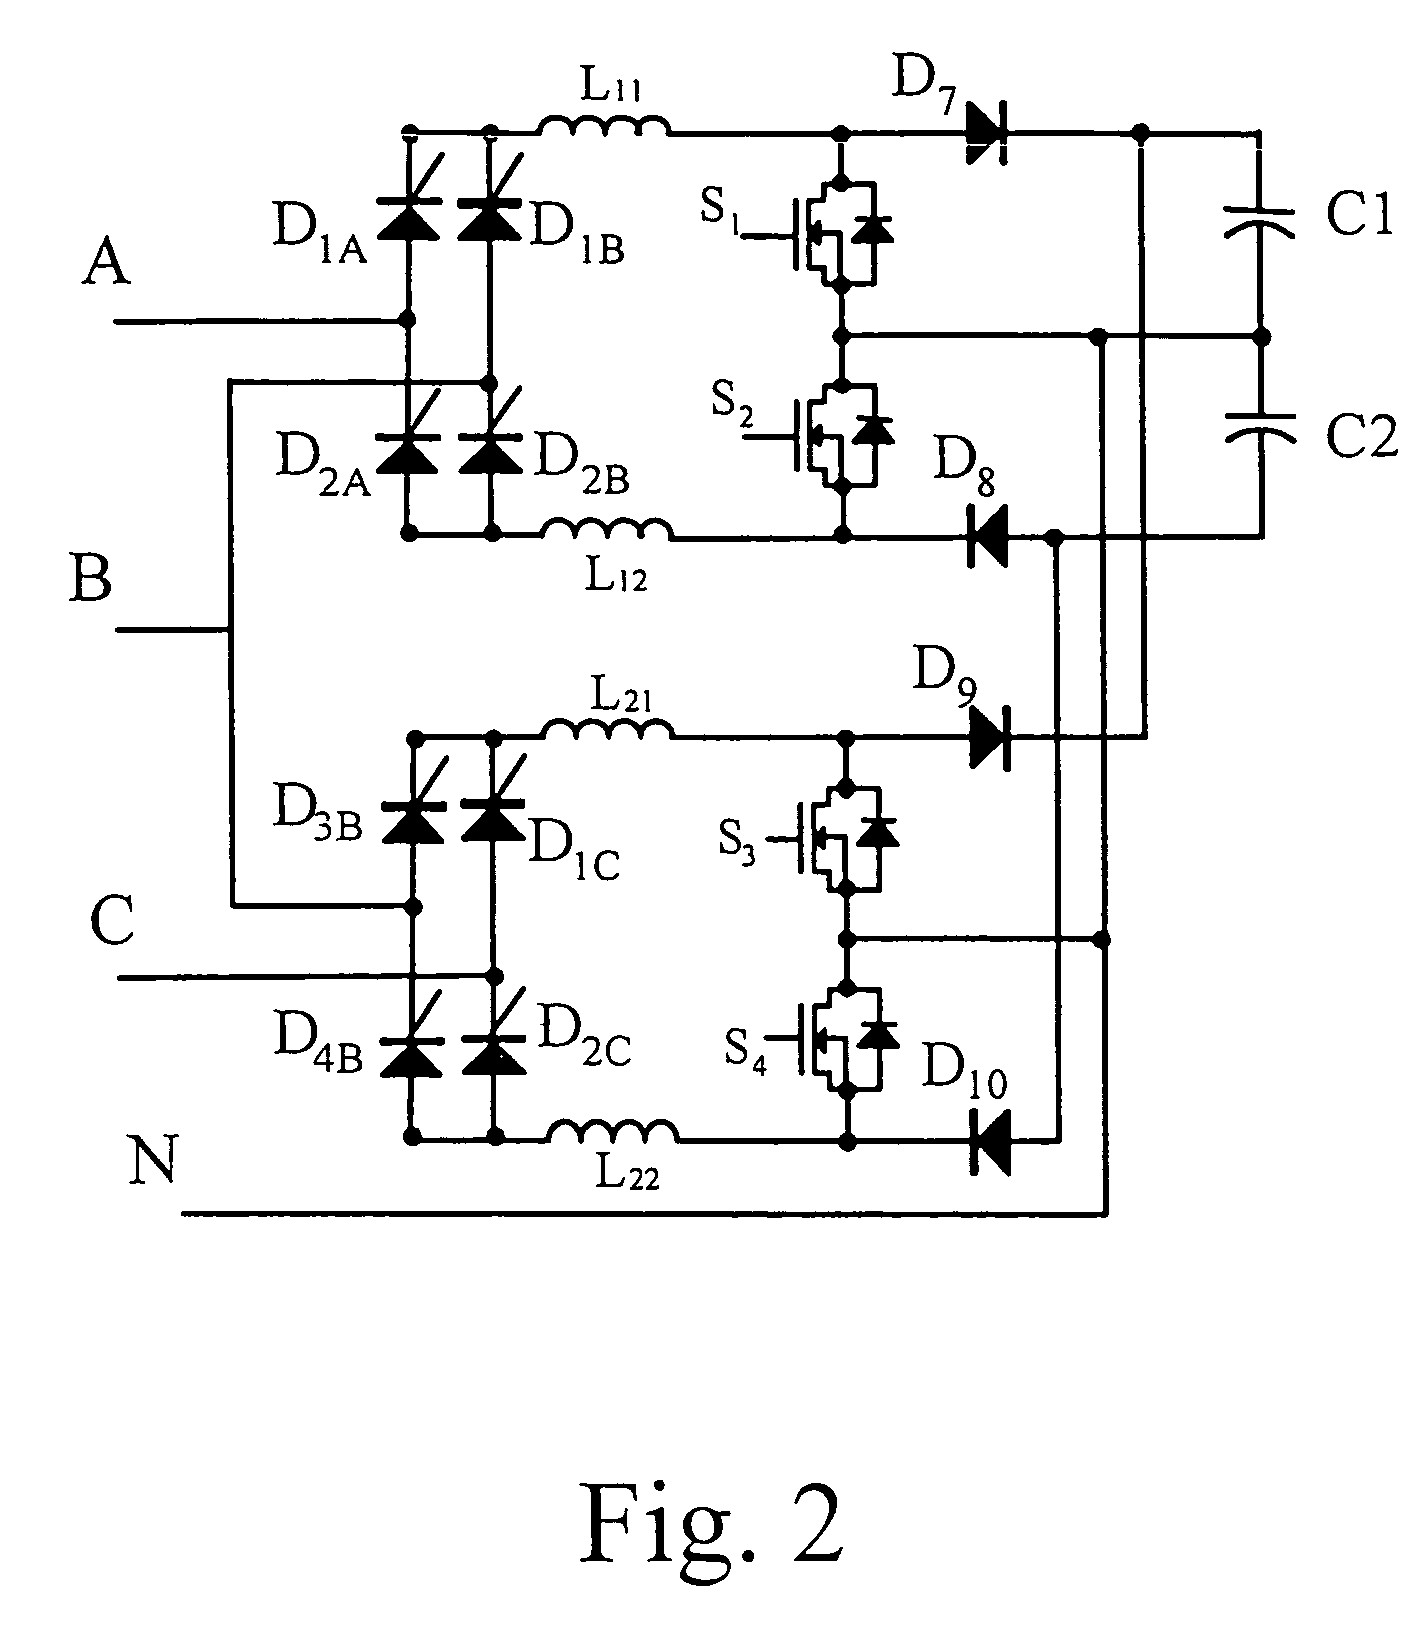 Integrated converter having three-phase power factor correction